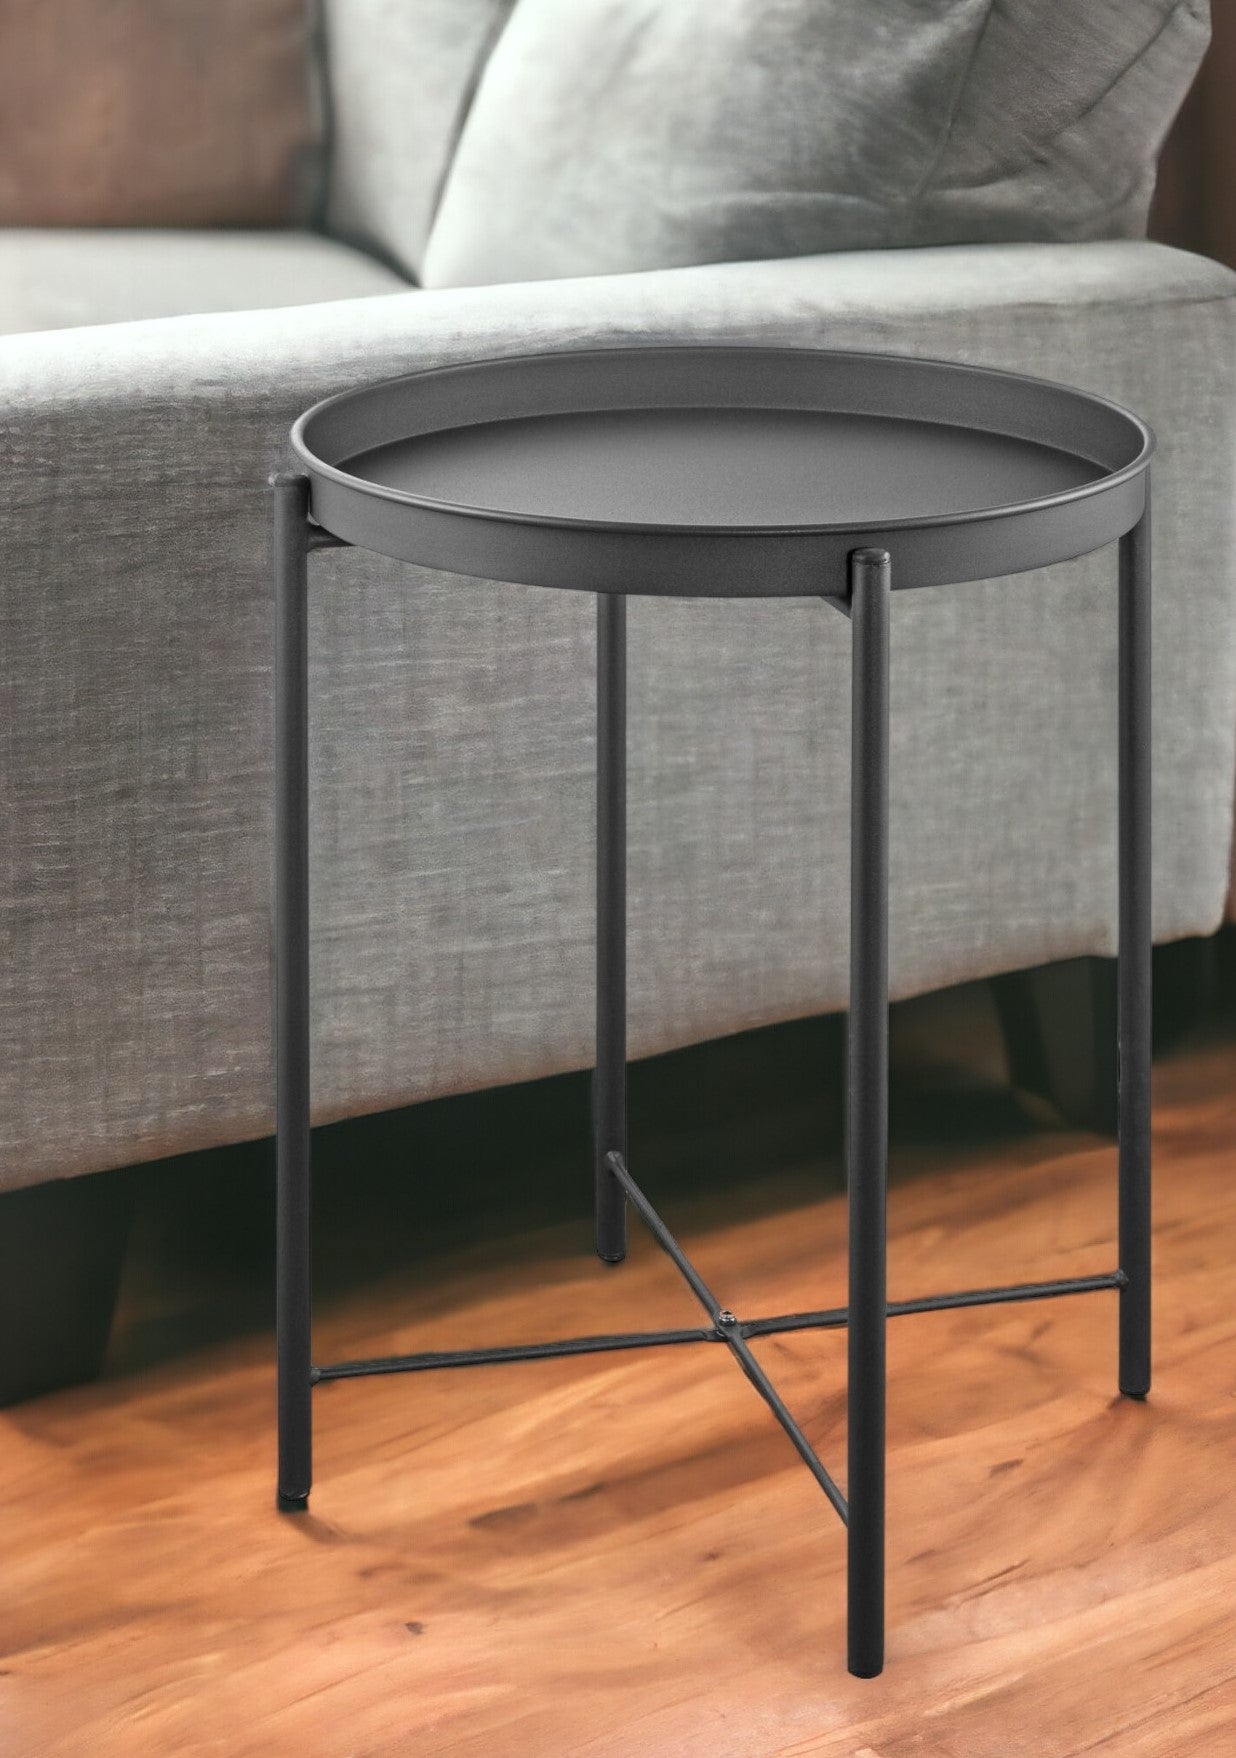 21" Gray Aluminum Round End Table